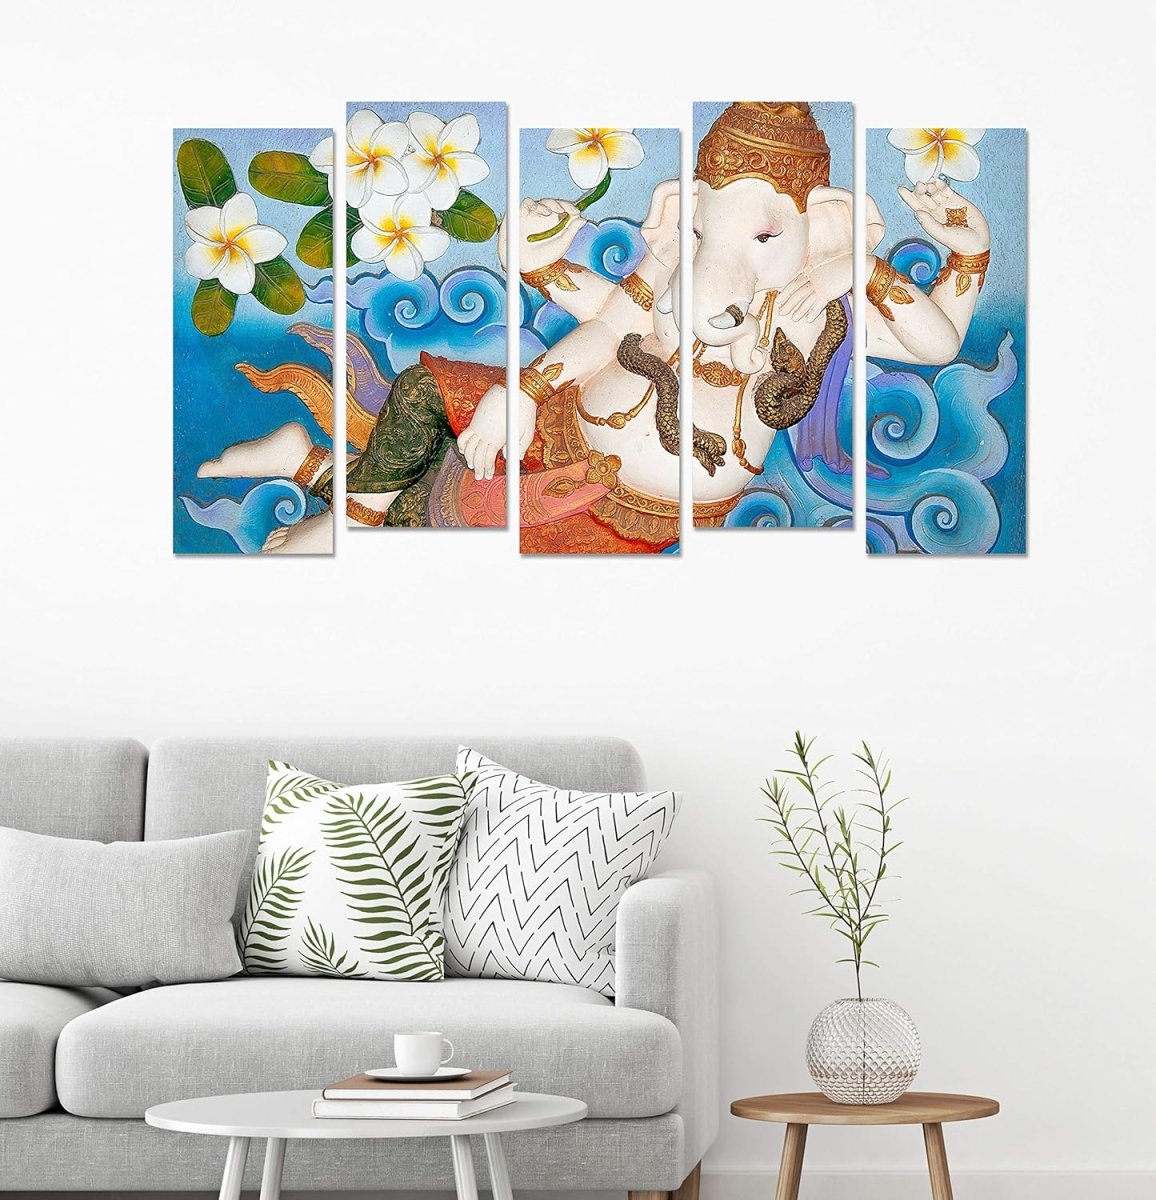 Metalkart Special Blessings of Plumeria: A Ganesha Series Wall Painting (Set of 5)